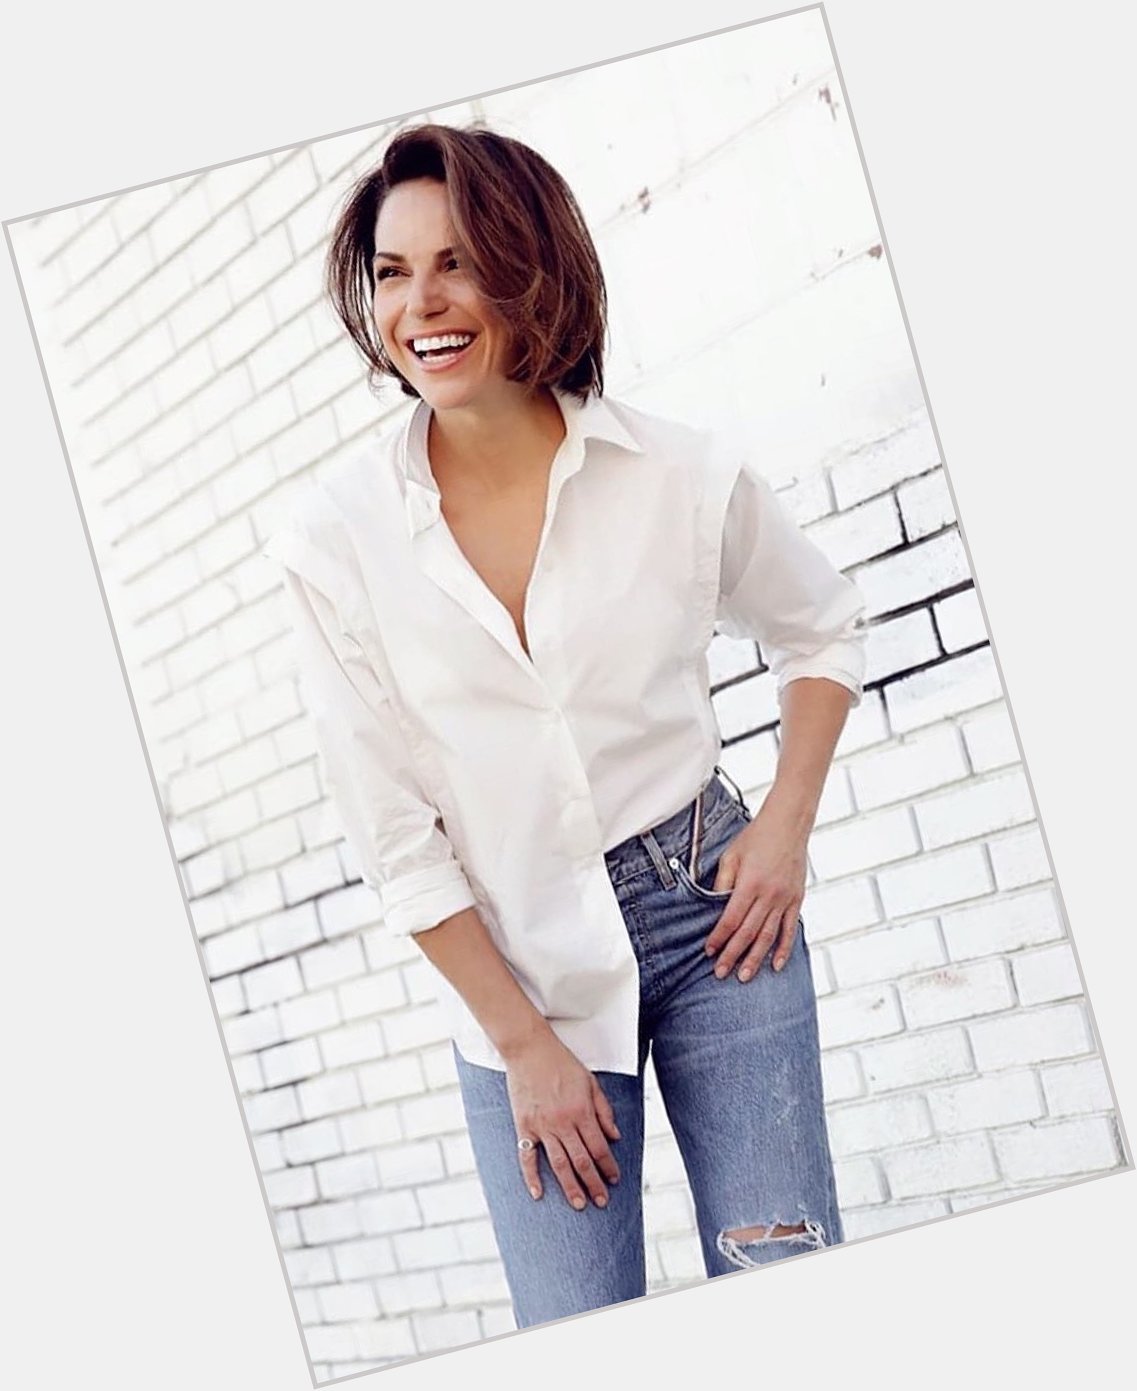 Happy birthday to one of my favourite actresses, the wonderful lana parrilla 